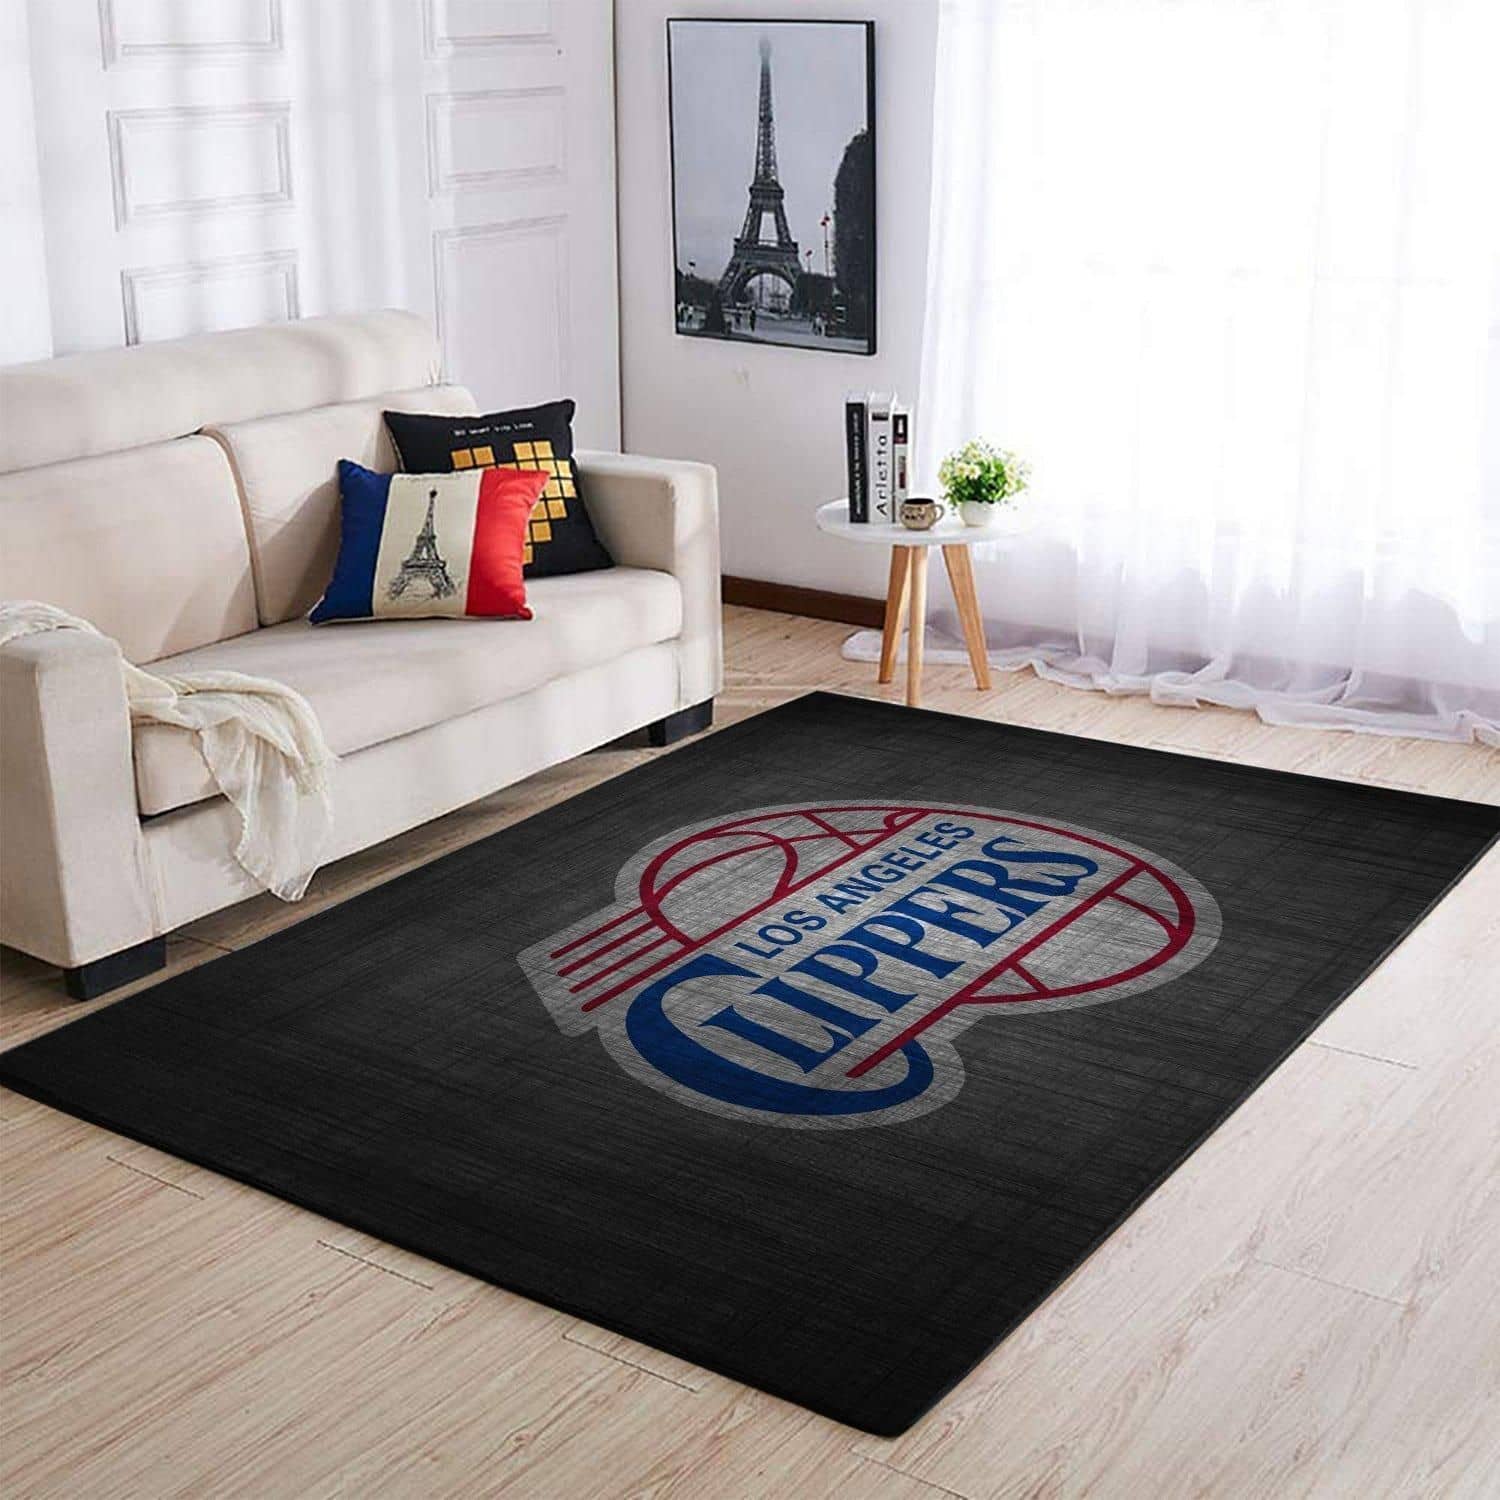 Amazon Los Angeles Clippers Living Room Area No3563 Rug